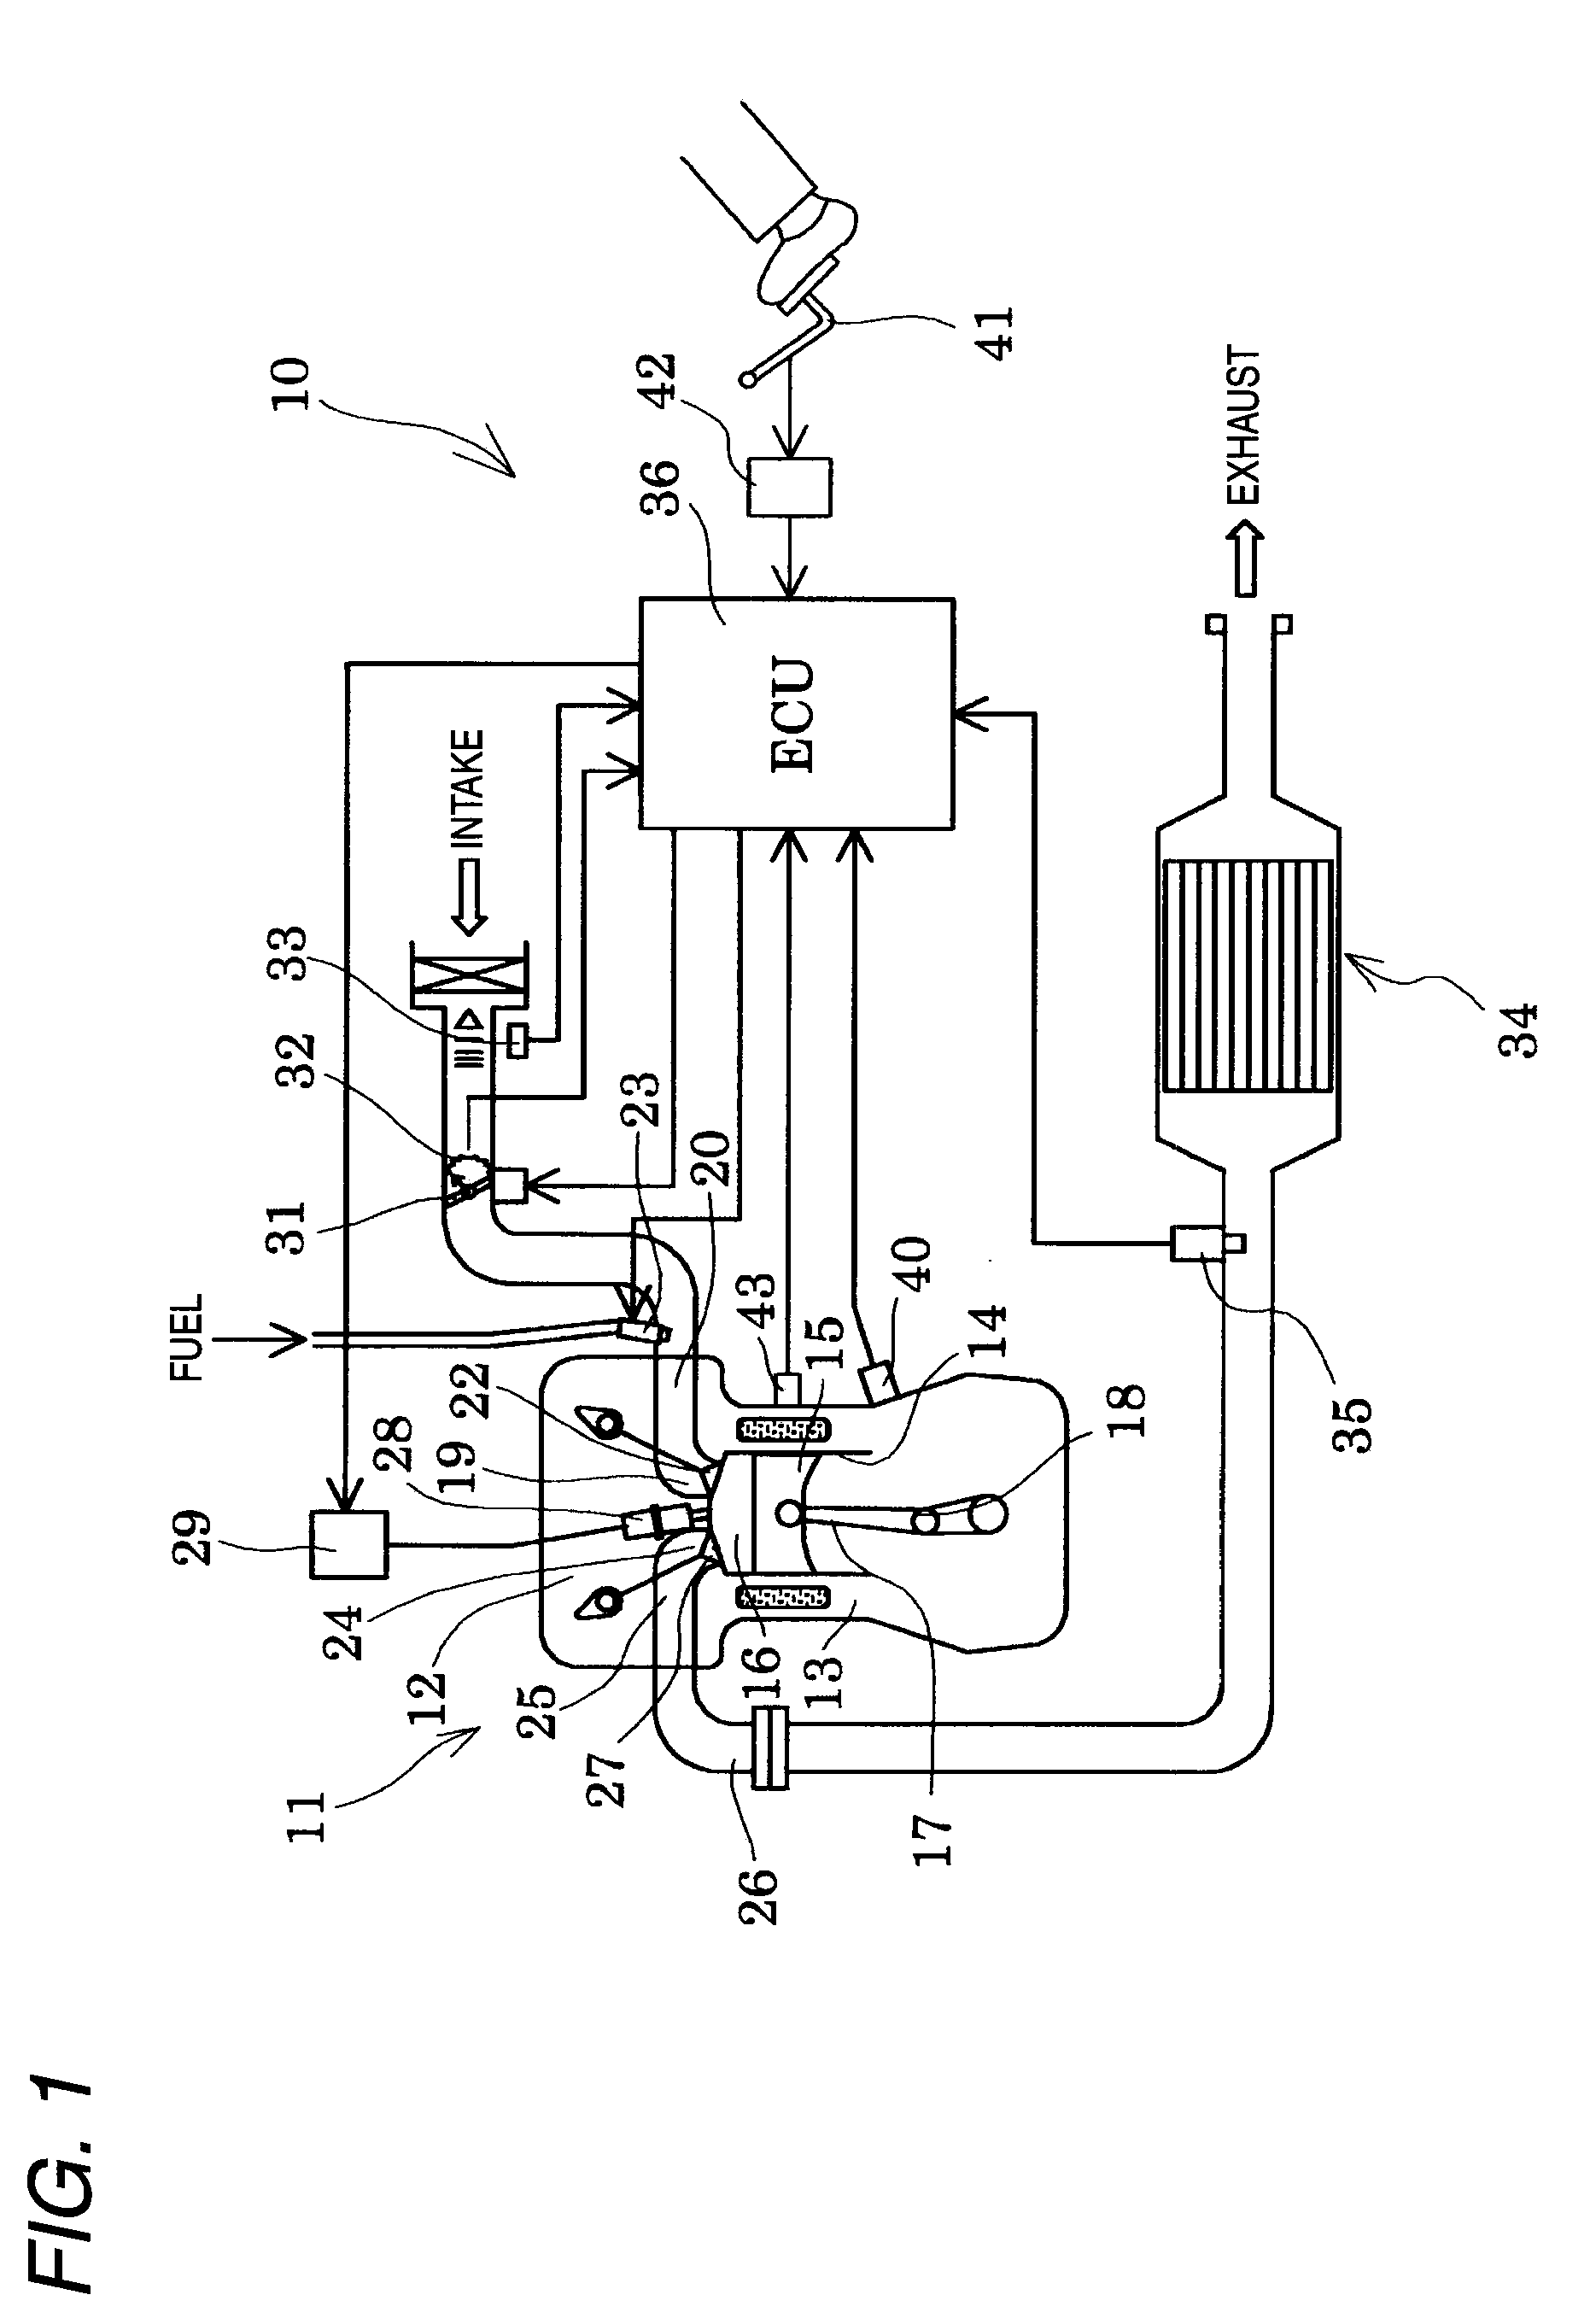 Controller of engine